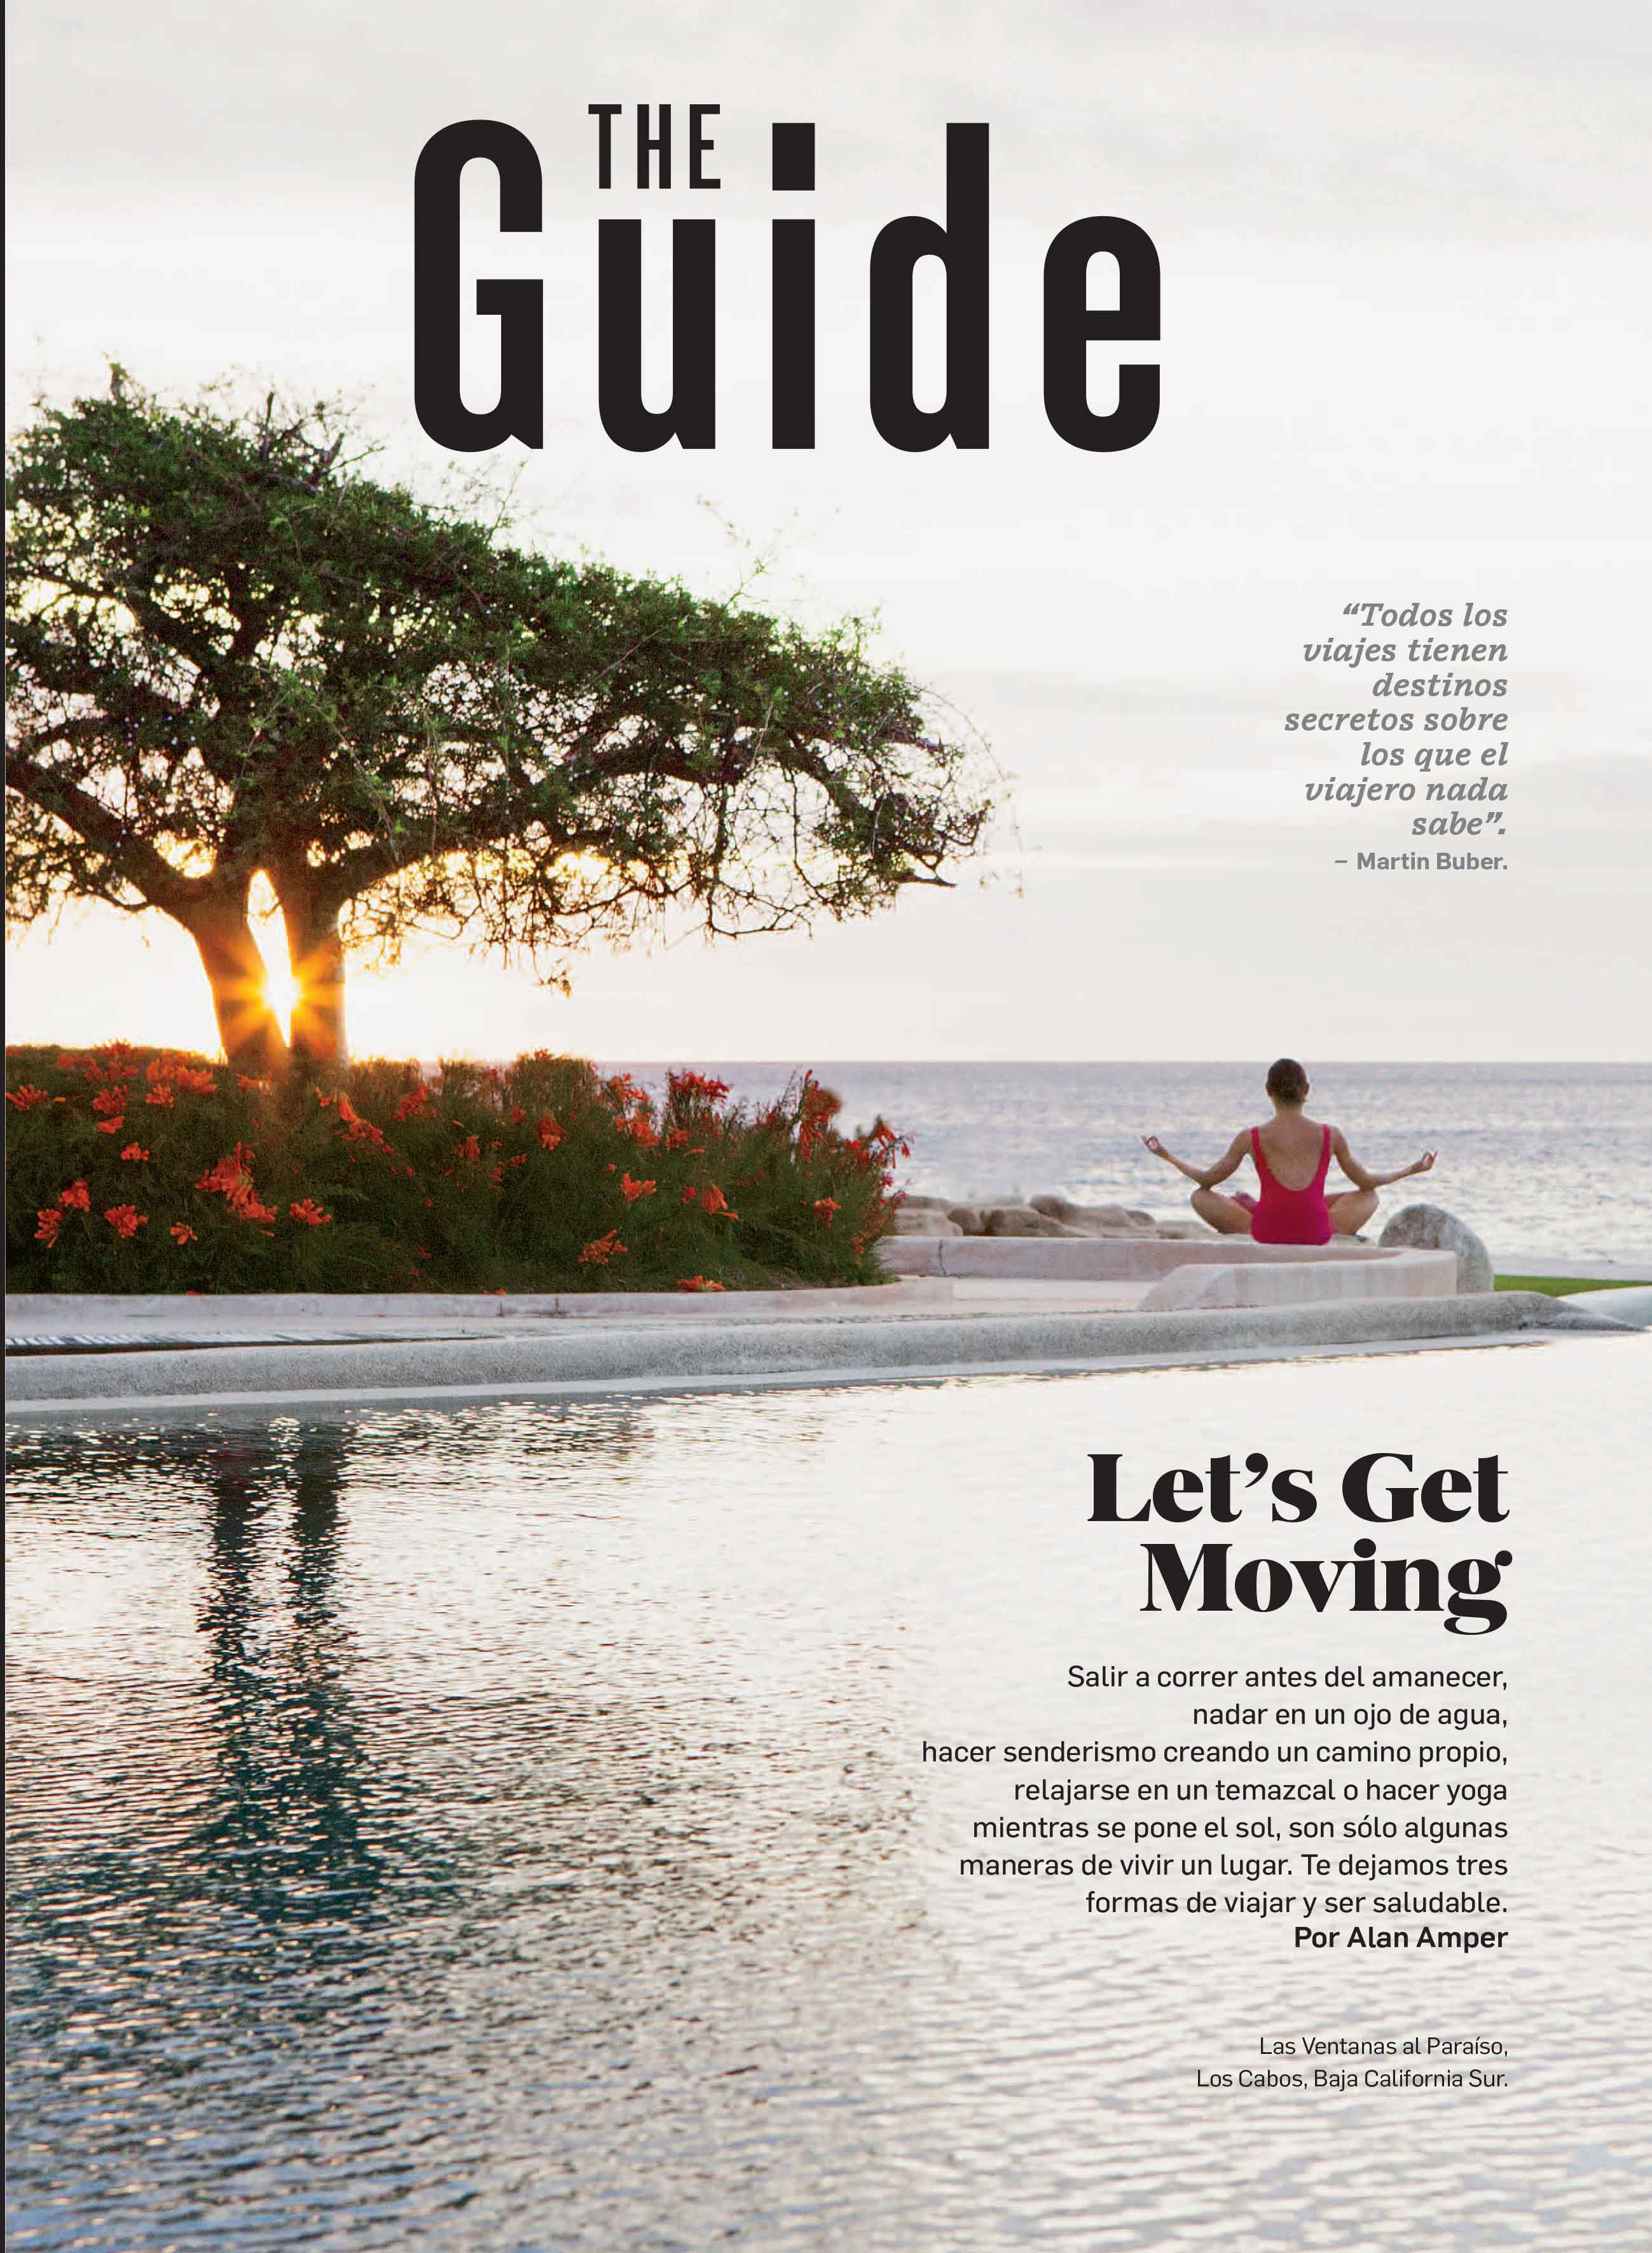 Travel + Leisure – Let’s Get Moving